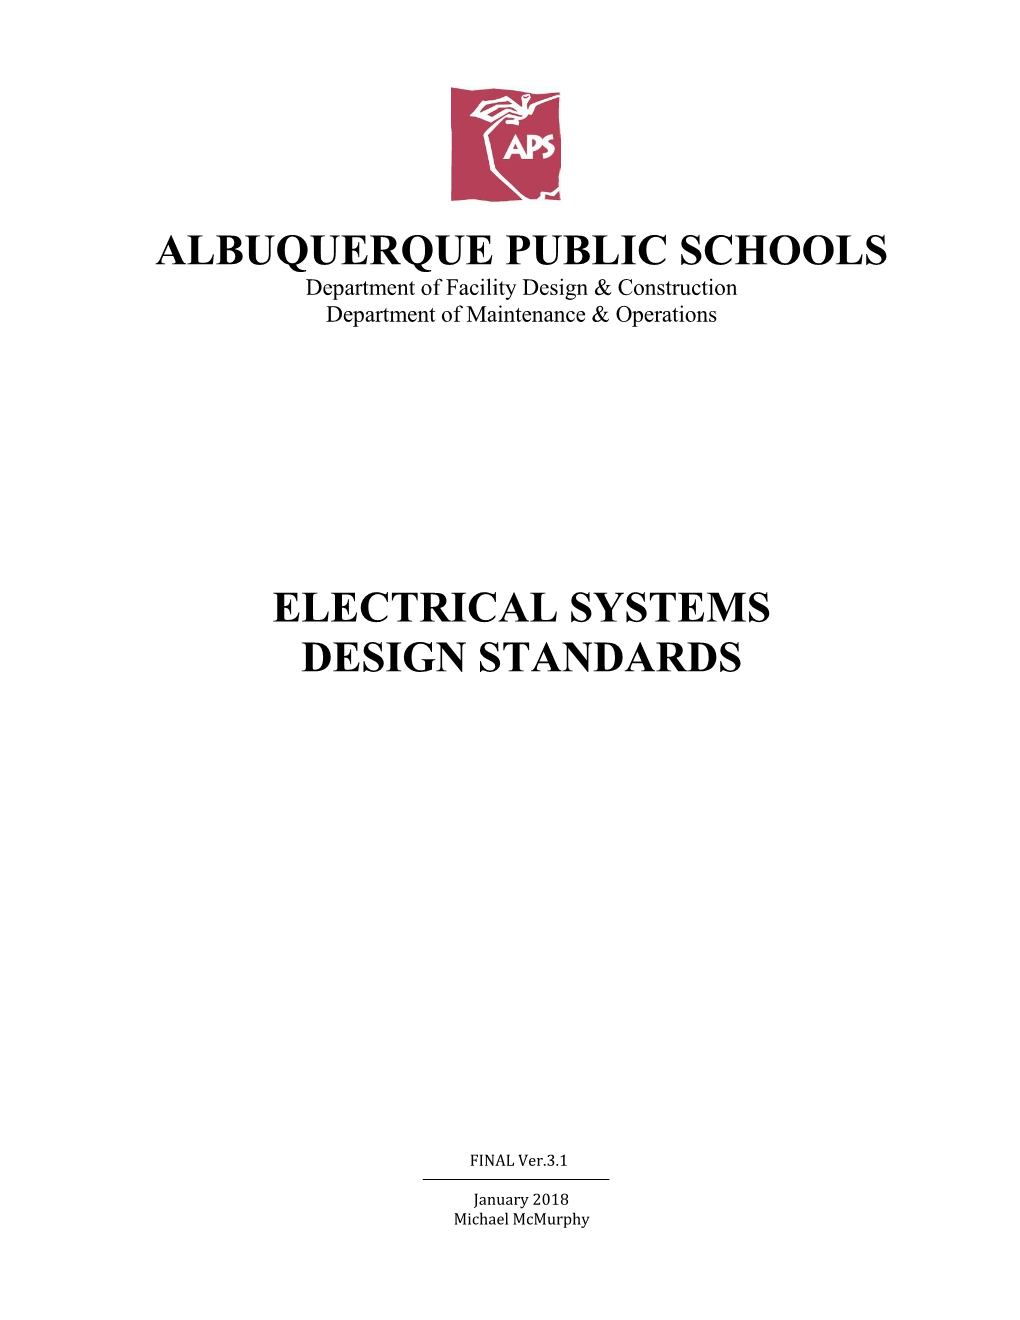 Electrical Systems Design Standards